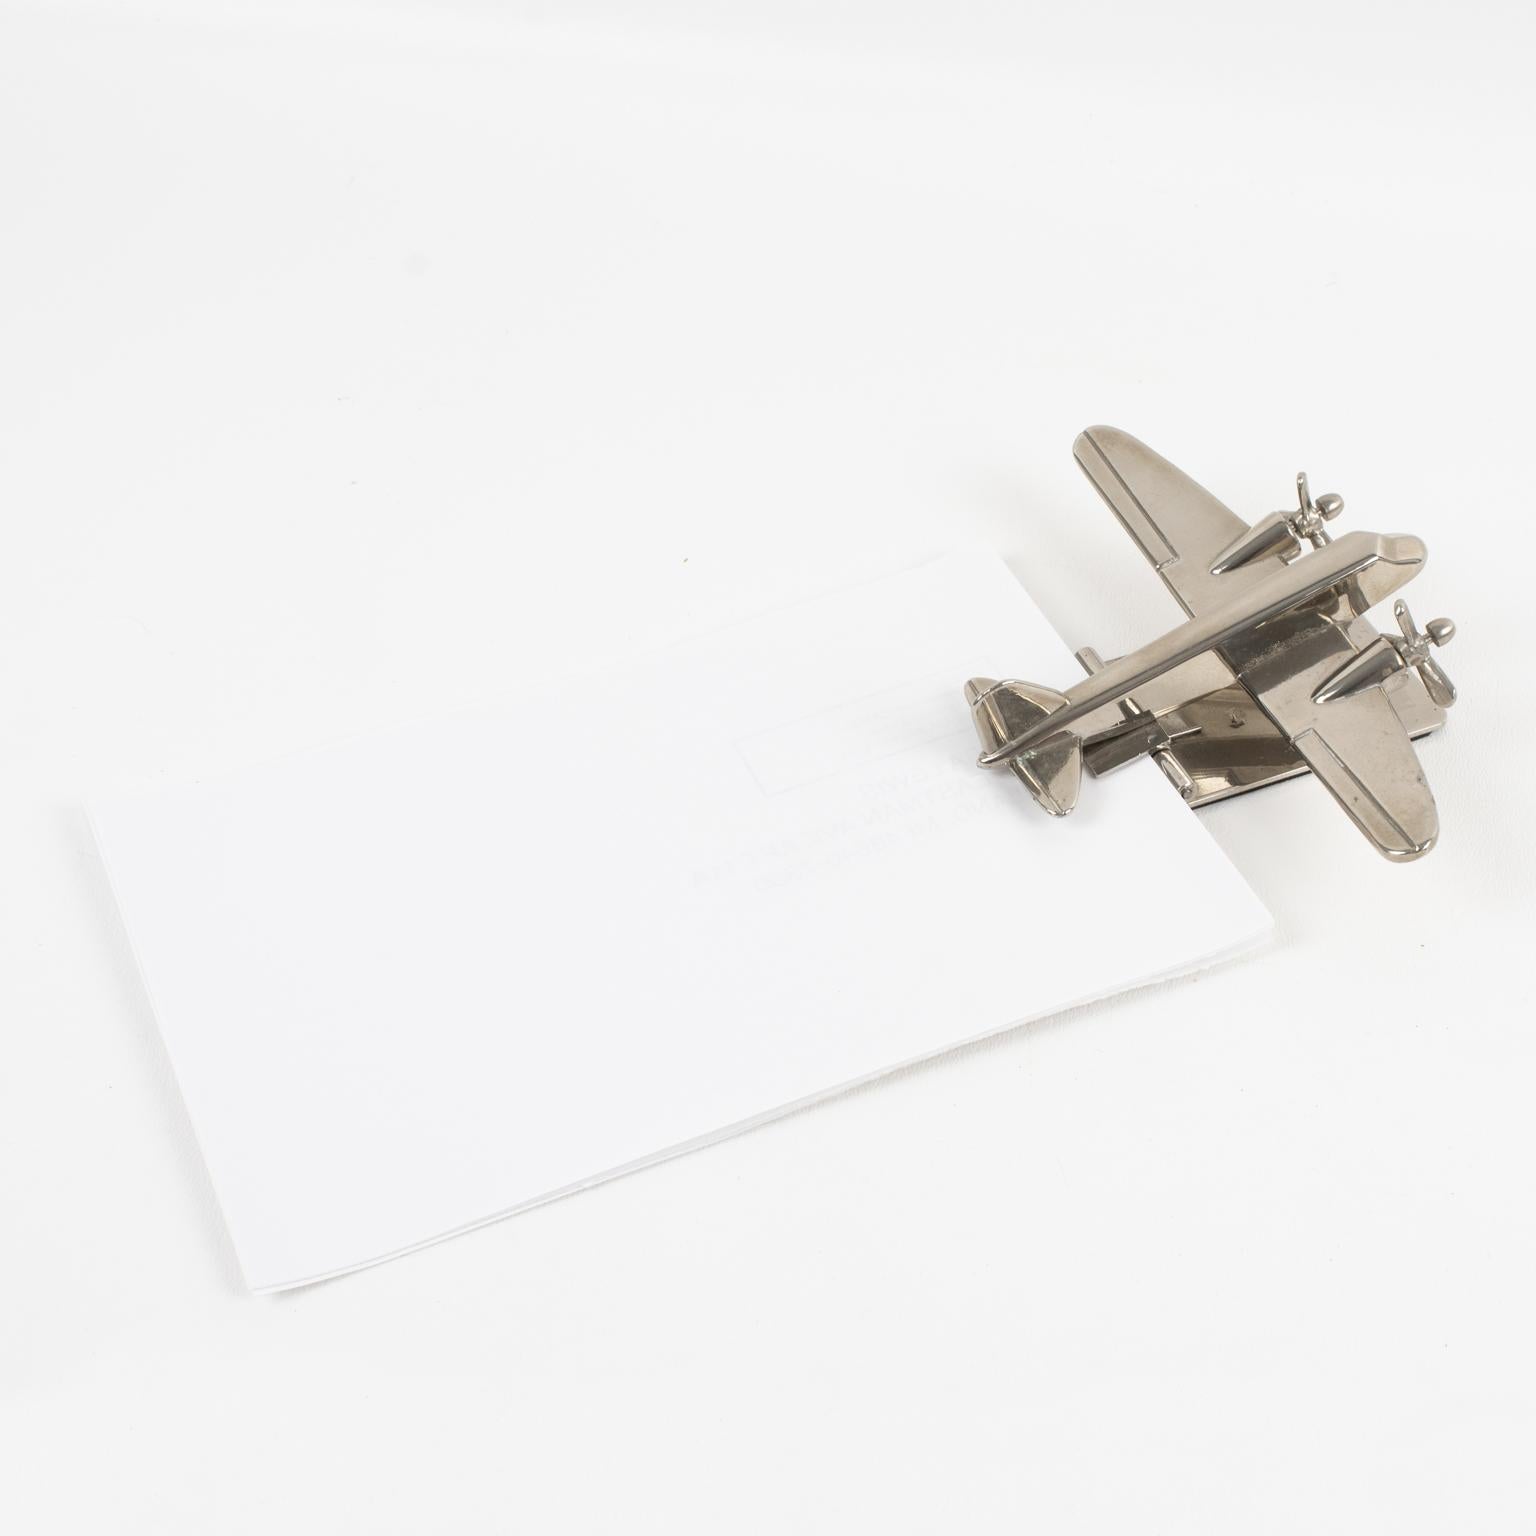 Stunning French 1960s Mid-Century airplane model desk accessory, paper clip. It is a small-scale airplane in chromed metal attached to a chrome plinth that can be used as a paper clip. Two propellers are in rotating condition. No visible maker's